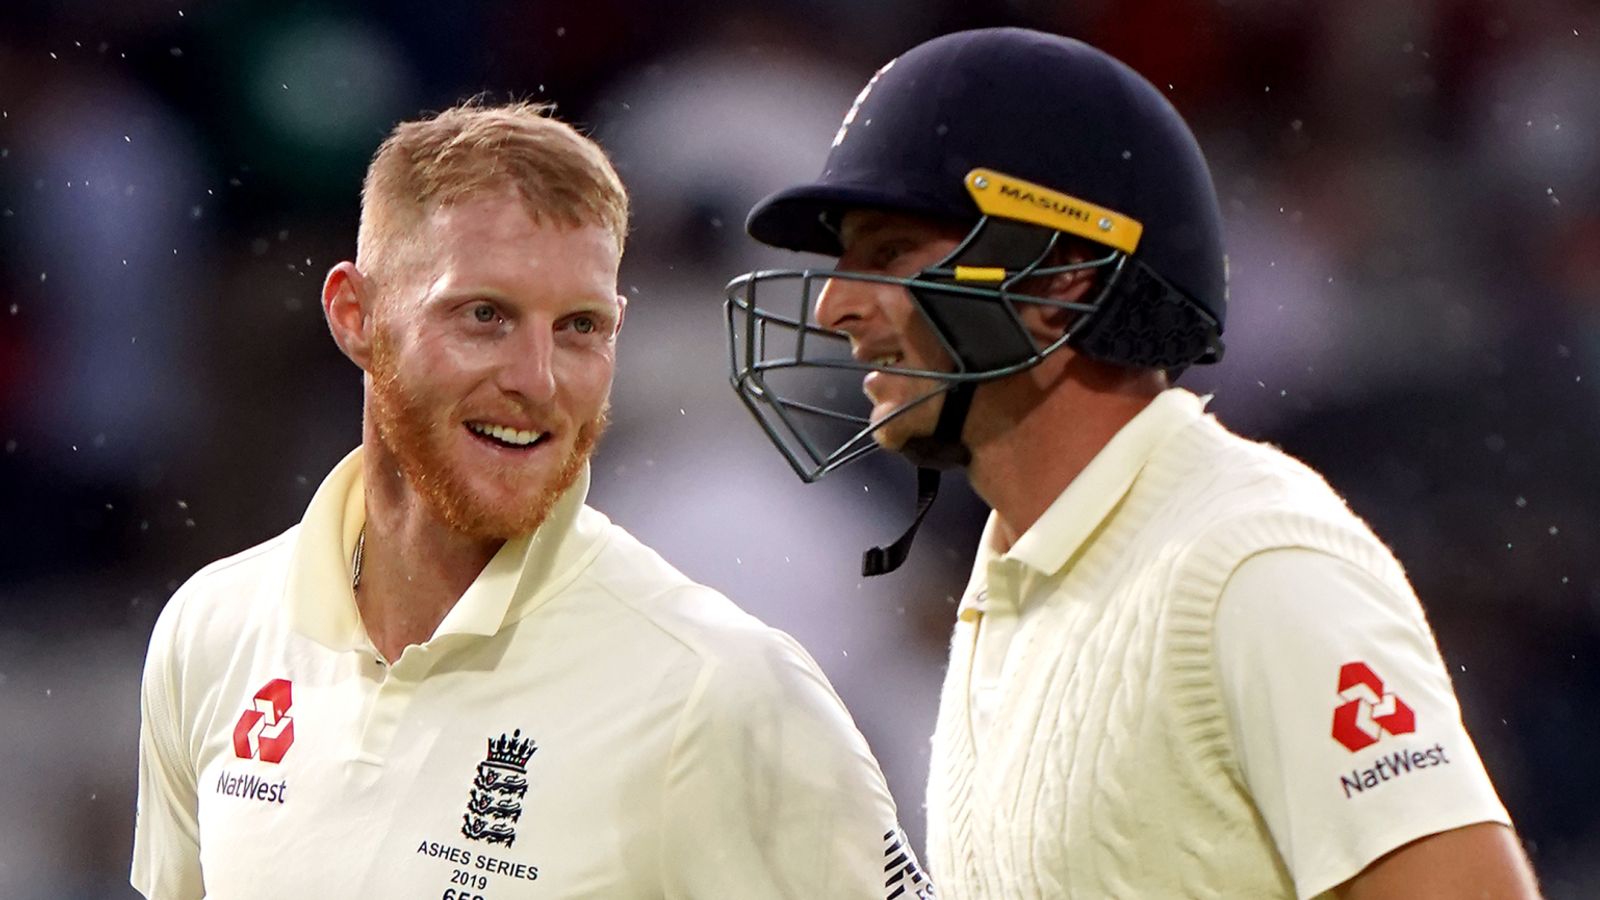 England duo Ben Stokes and Jos Buttler will not be rushed back from injury, says Eoin Morgan